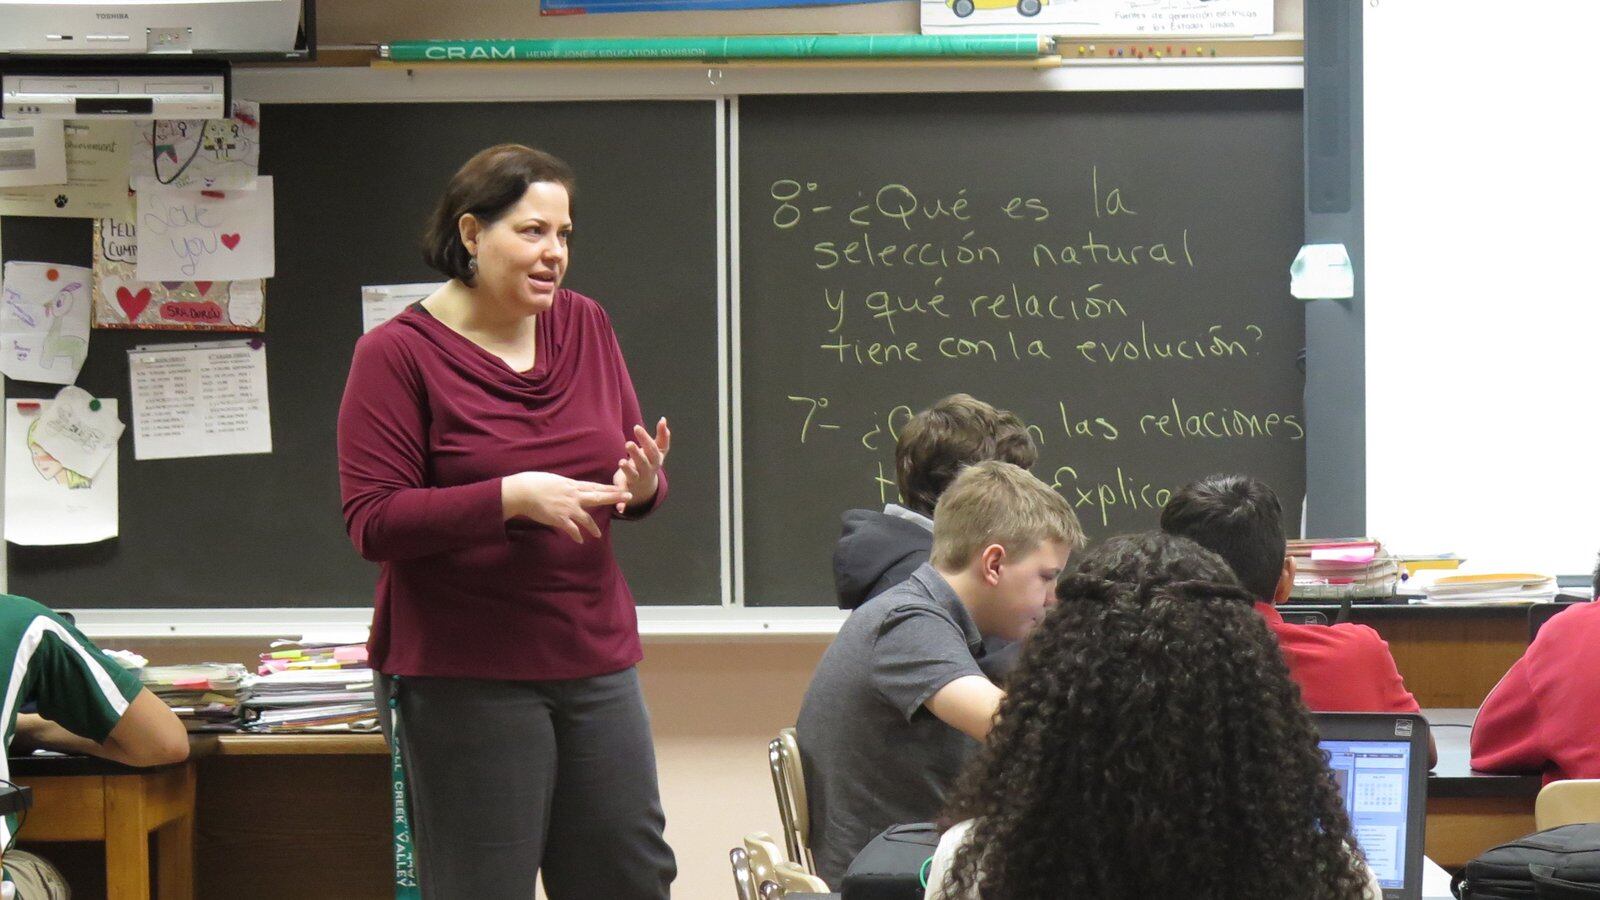 A woman in a maroon blouse instructs her class, standing in between the desks of her students